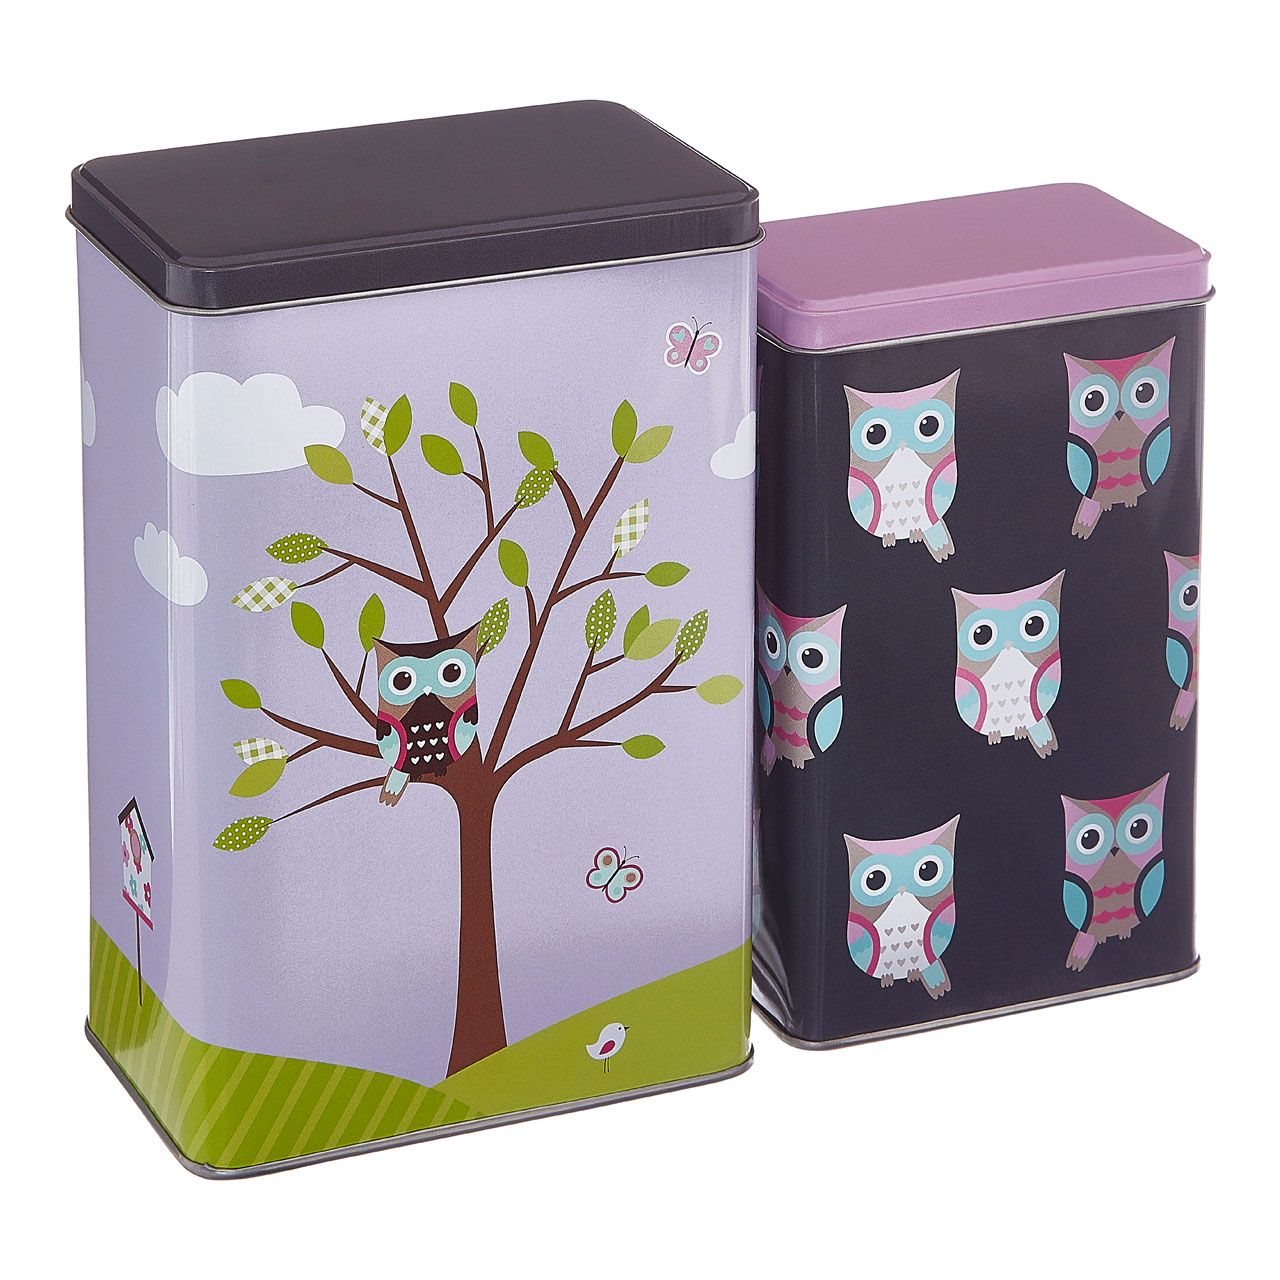 Set of 2 Happy Owls Storage Canisters